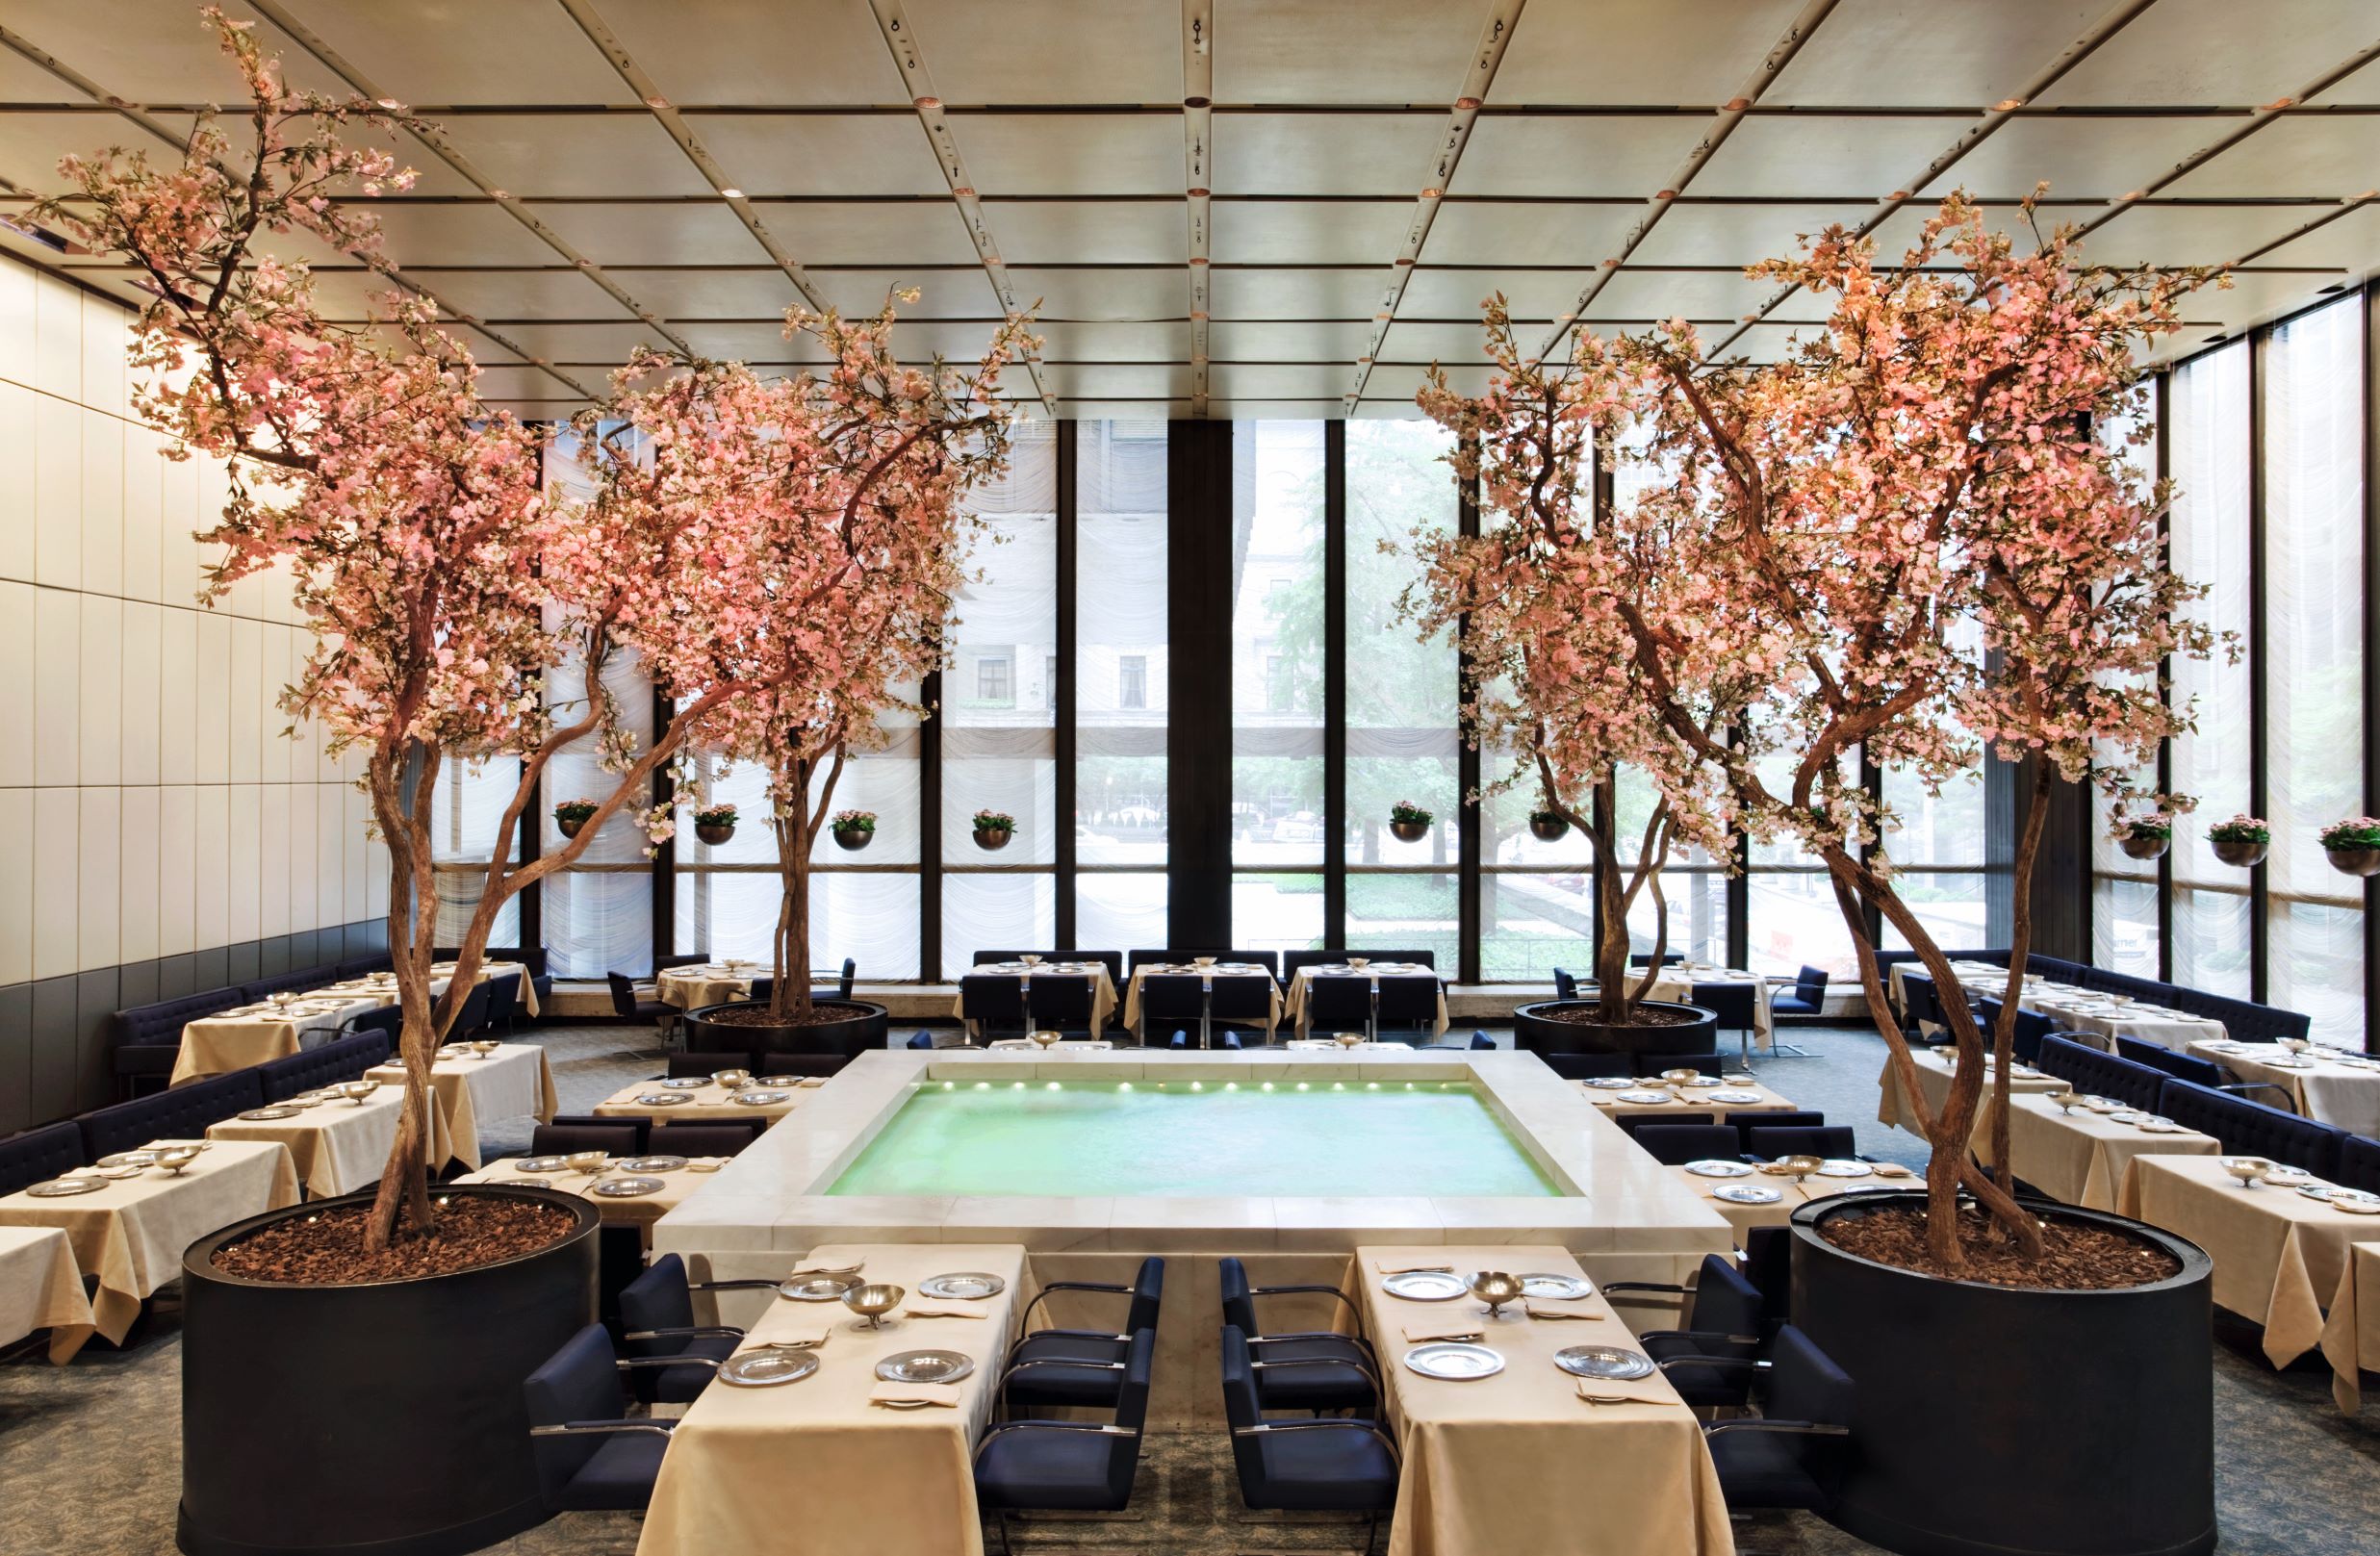 Interior view of the Pool Room in the Four Seasons restaurant in the Seagram Building, [Seagram Building, Philip Johnson and Ludwig Mies van der Rohe, New York, 1958]. Photo Jennifer Calais Smith